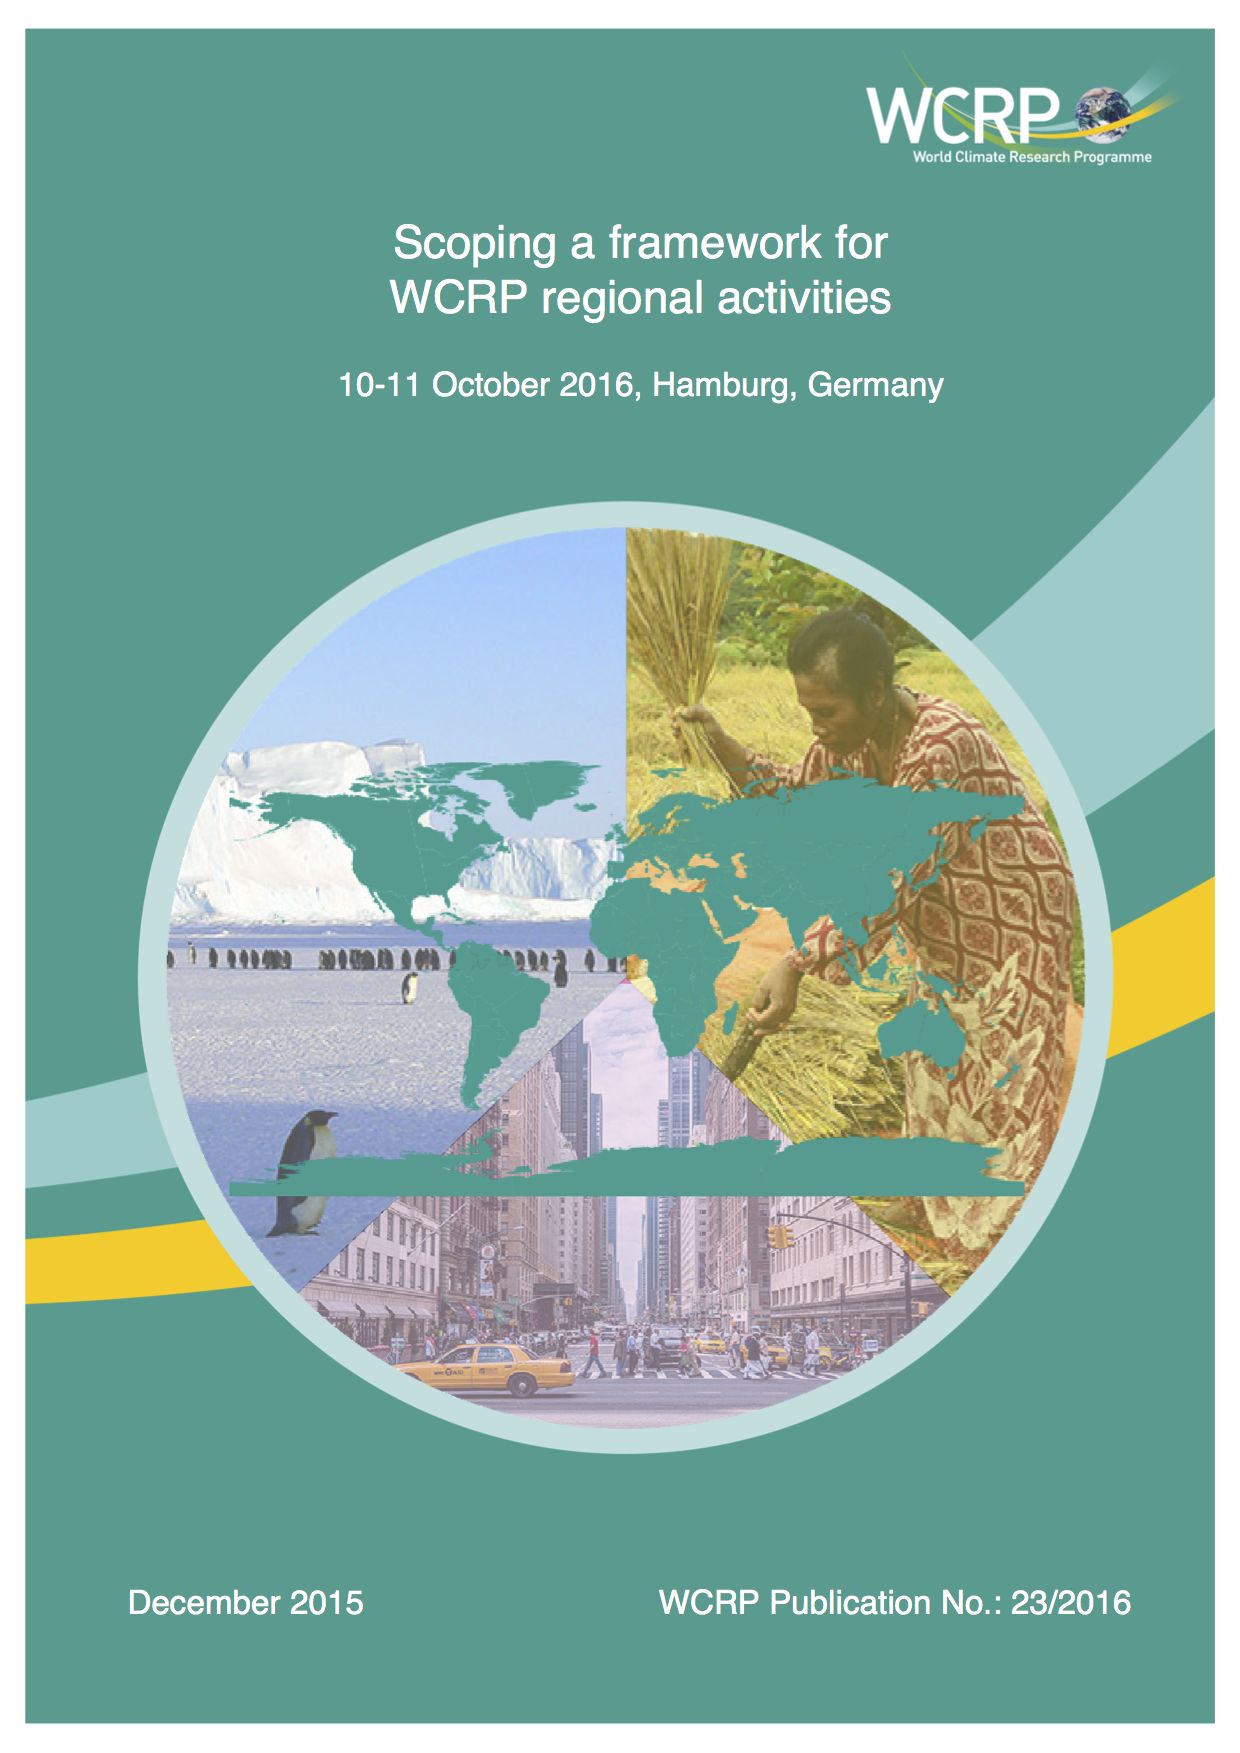 Scoping a Framework for WCRP Regional Activities